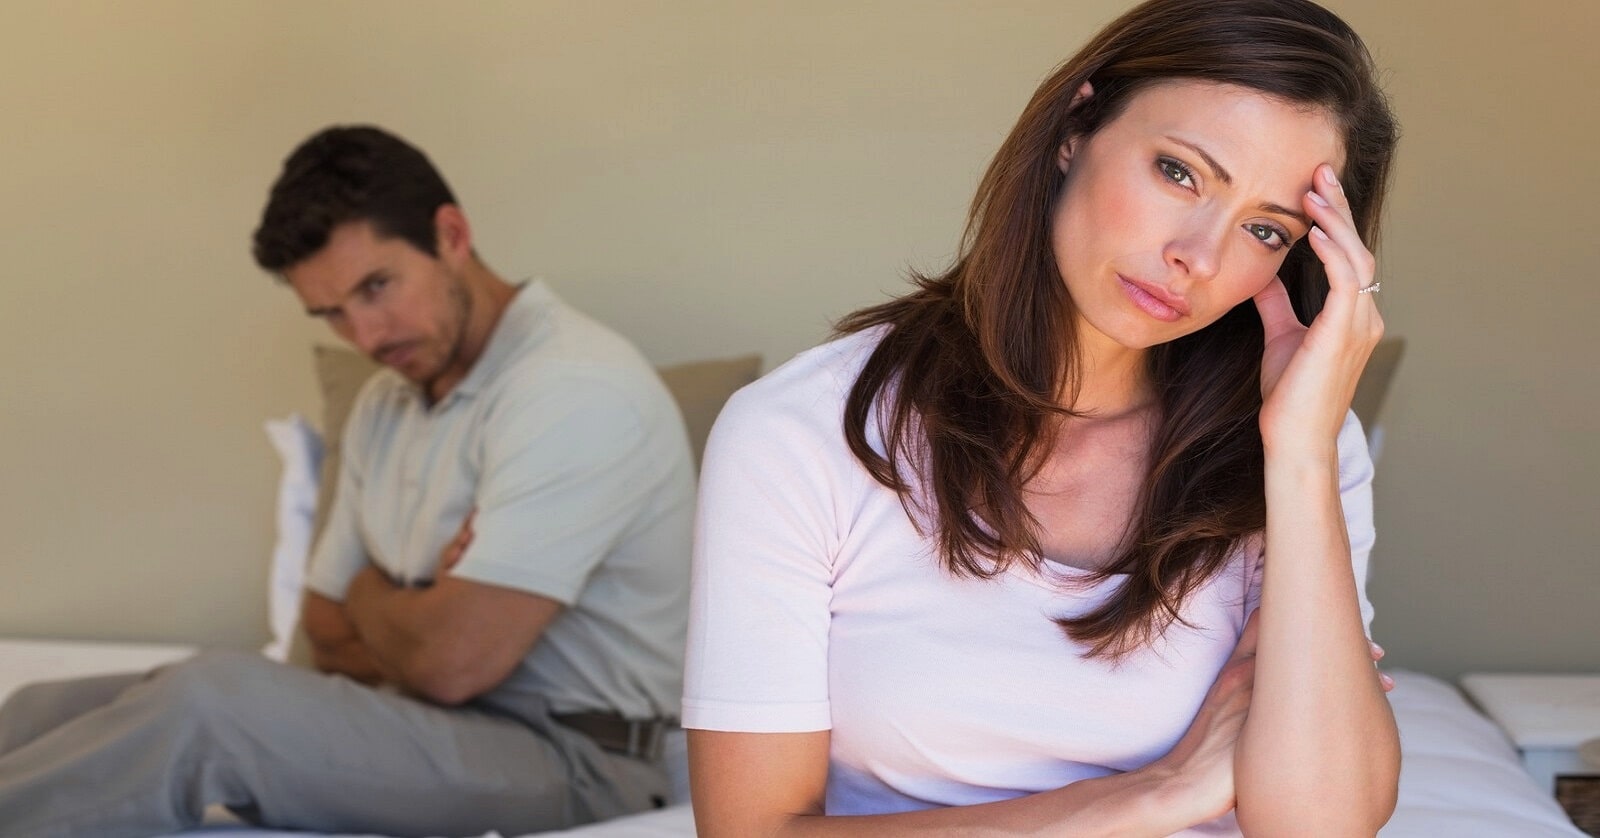 12 Things To Do If You Found Out Your Spouse Cheated On You Years Ago